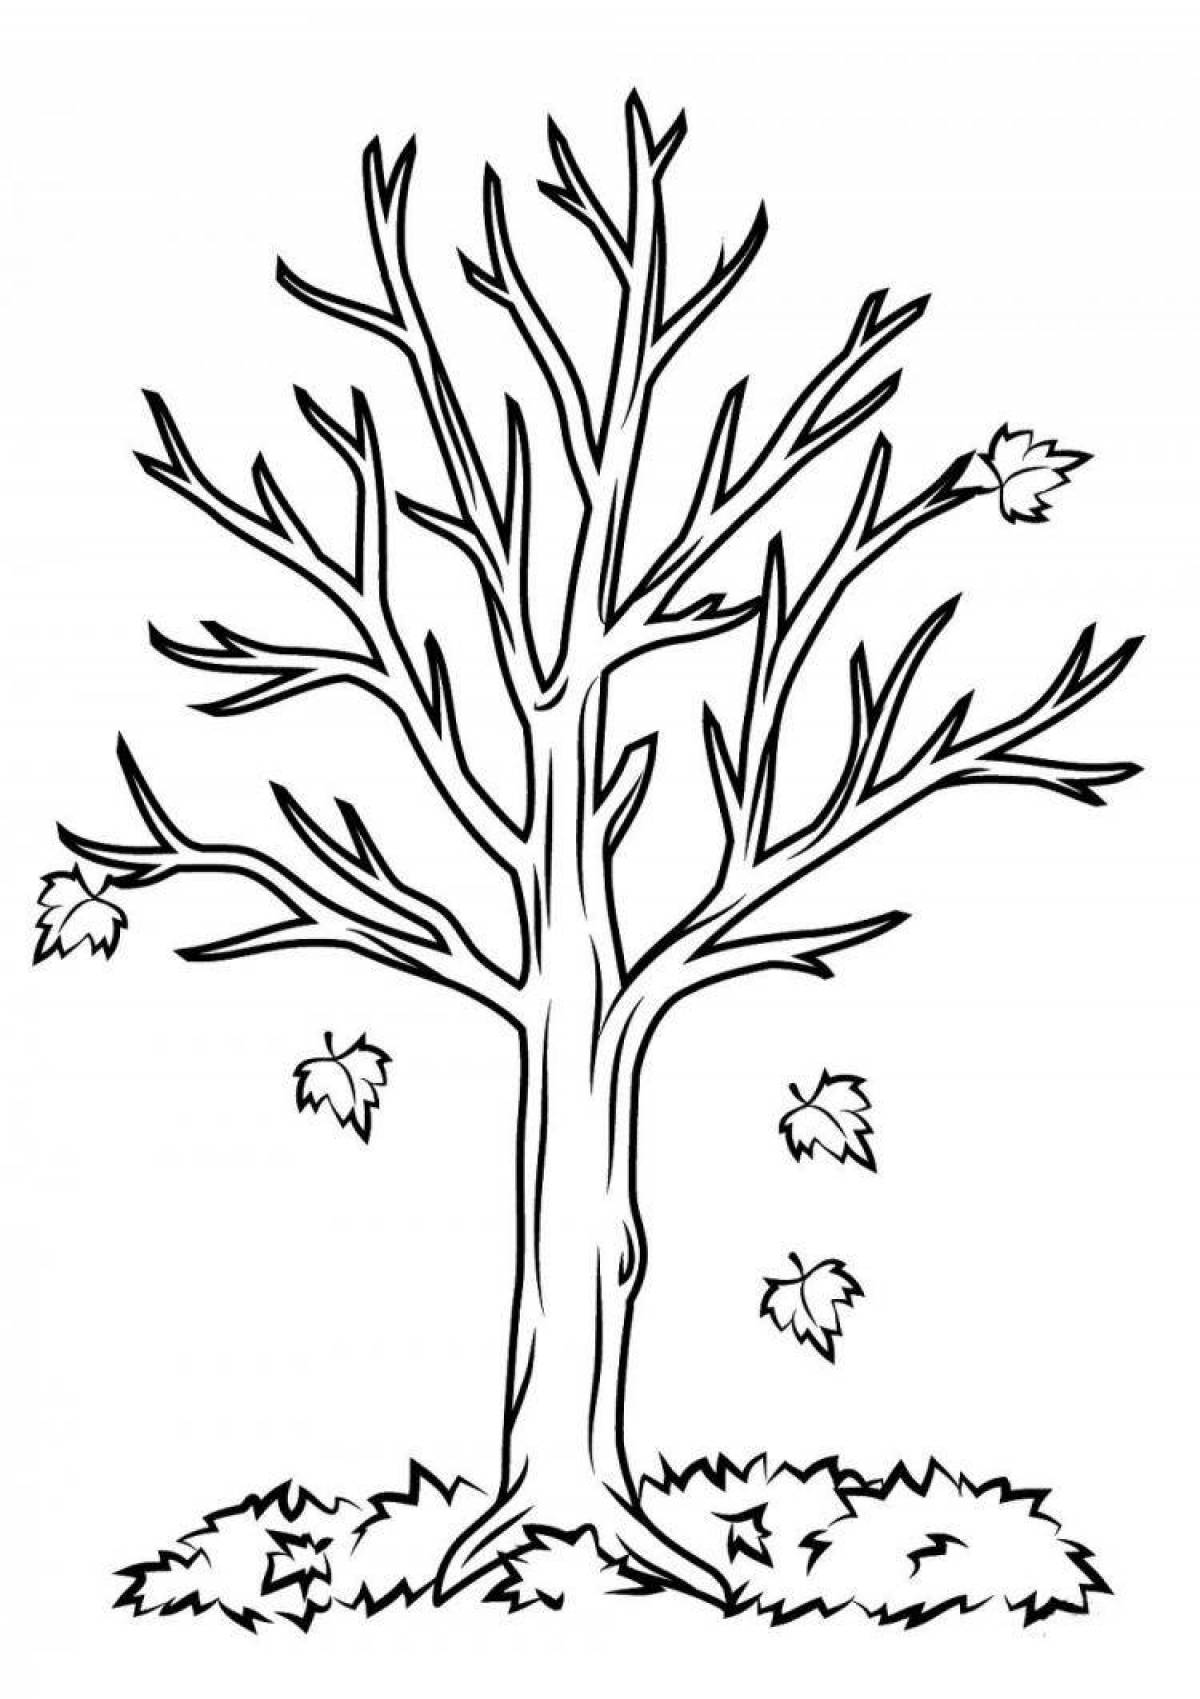 Great tree coloring book for 6-7 year olds